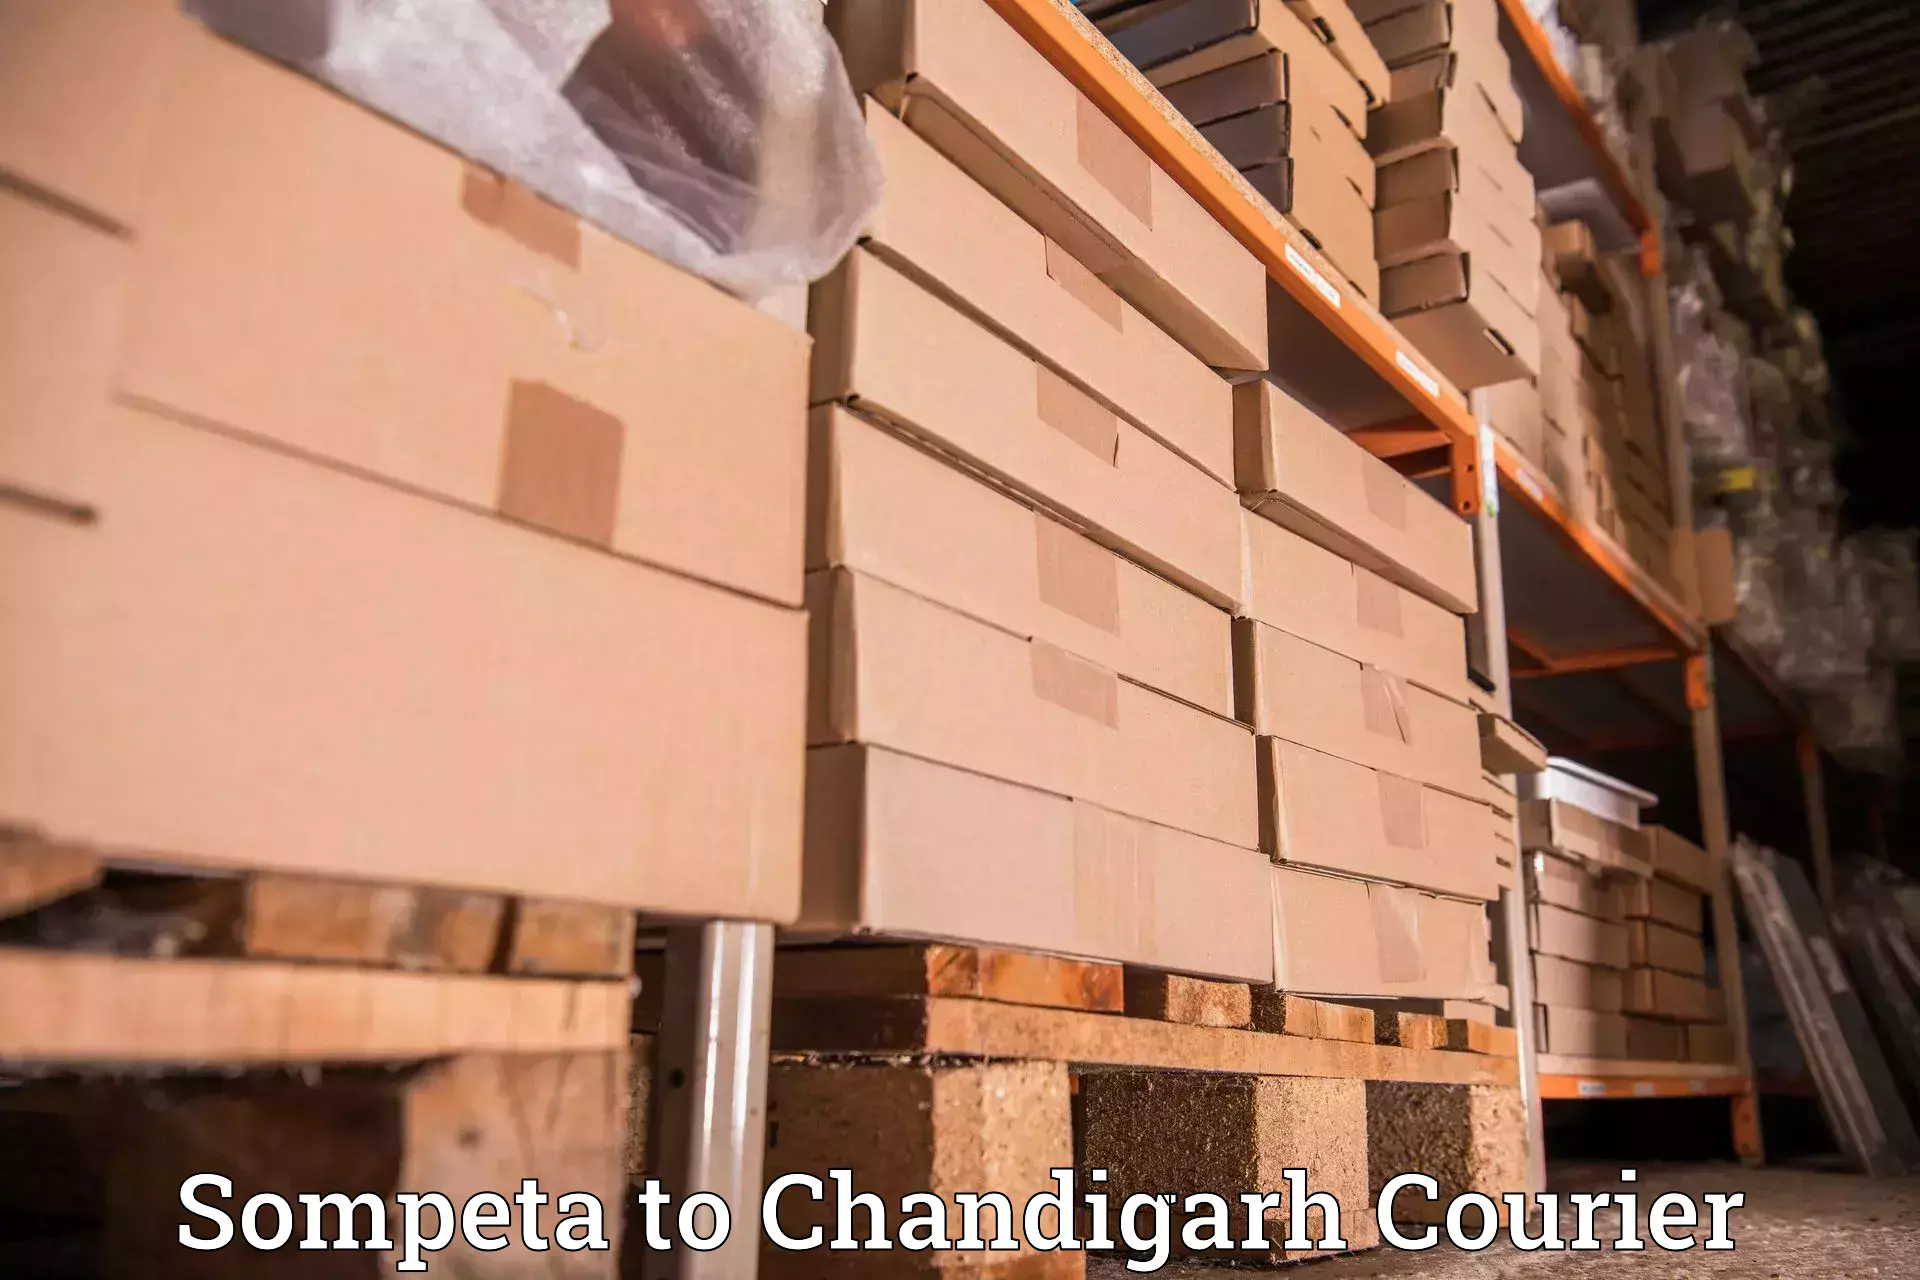 Subscription-based courier Sompeta to Chandigarh